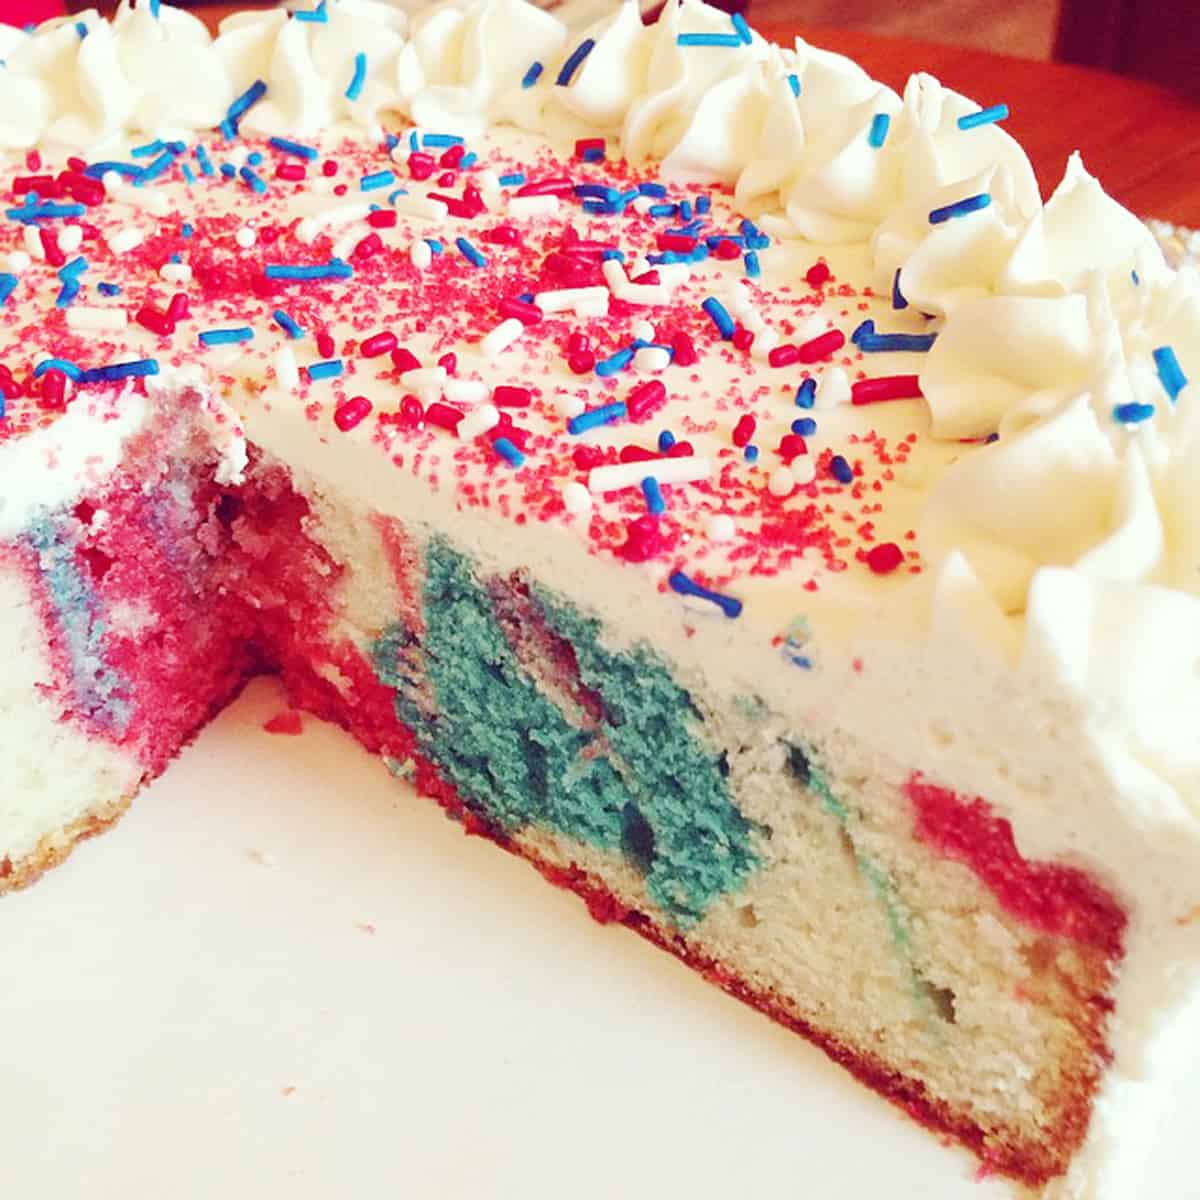 Red, white and blue tie dye cake with buttercream frosting.